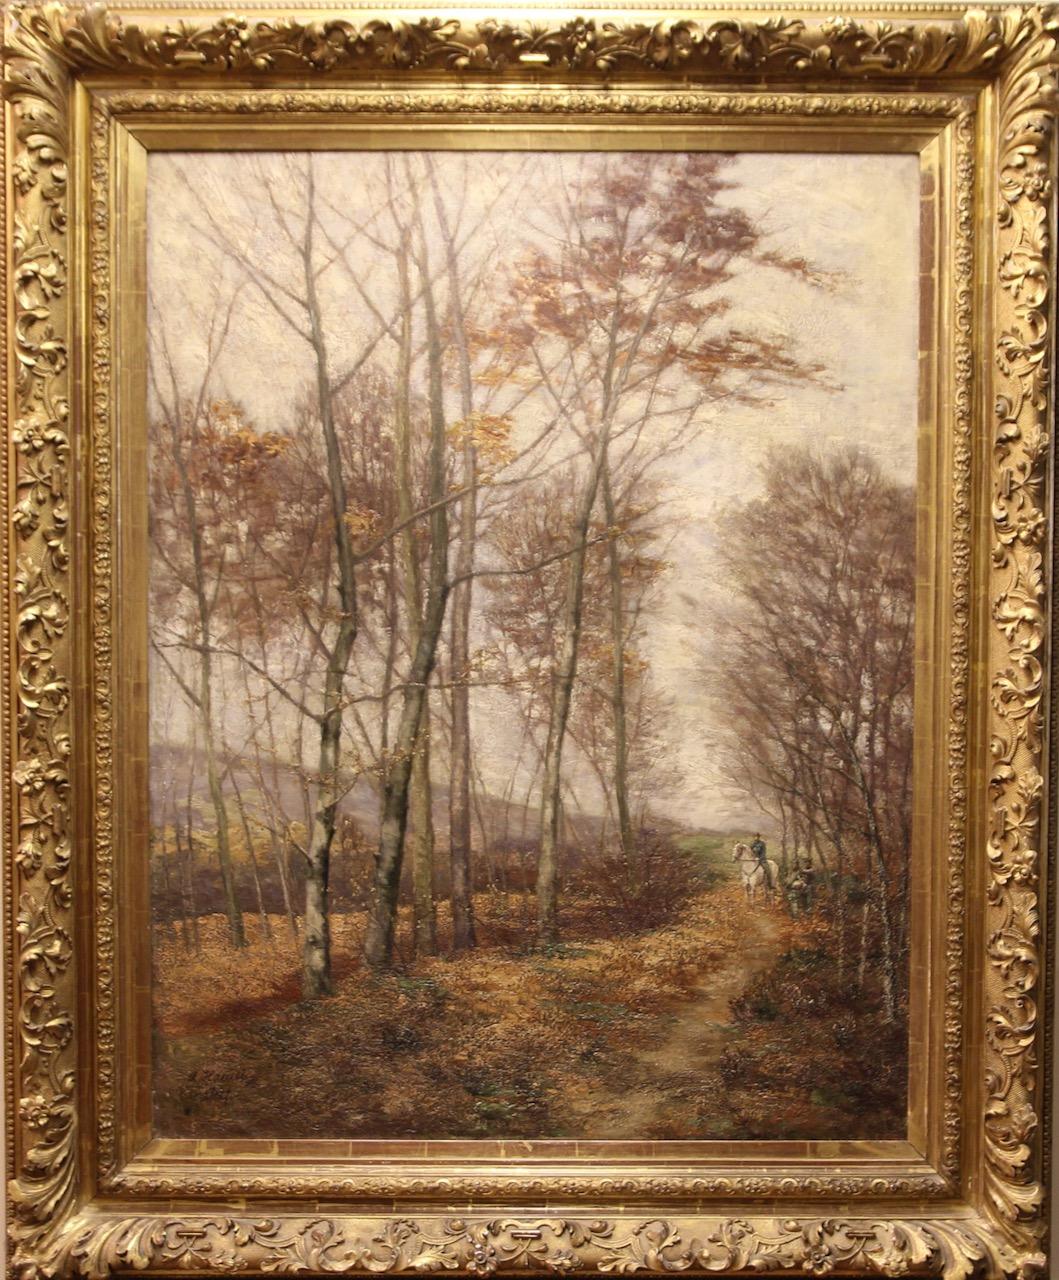 Unknown Landscape Painting - Antique, large Oil Painting "Walk in the autumn forest" by A. or O. Hamel